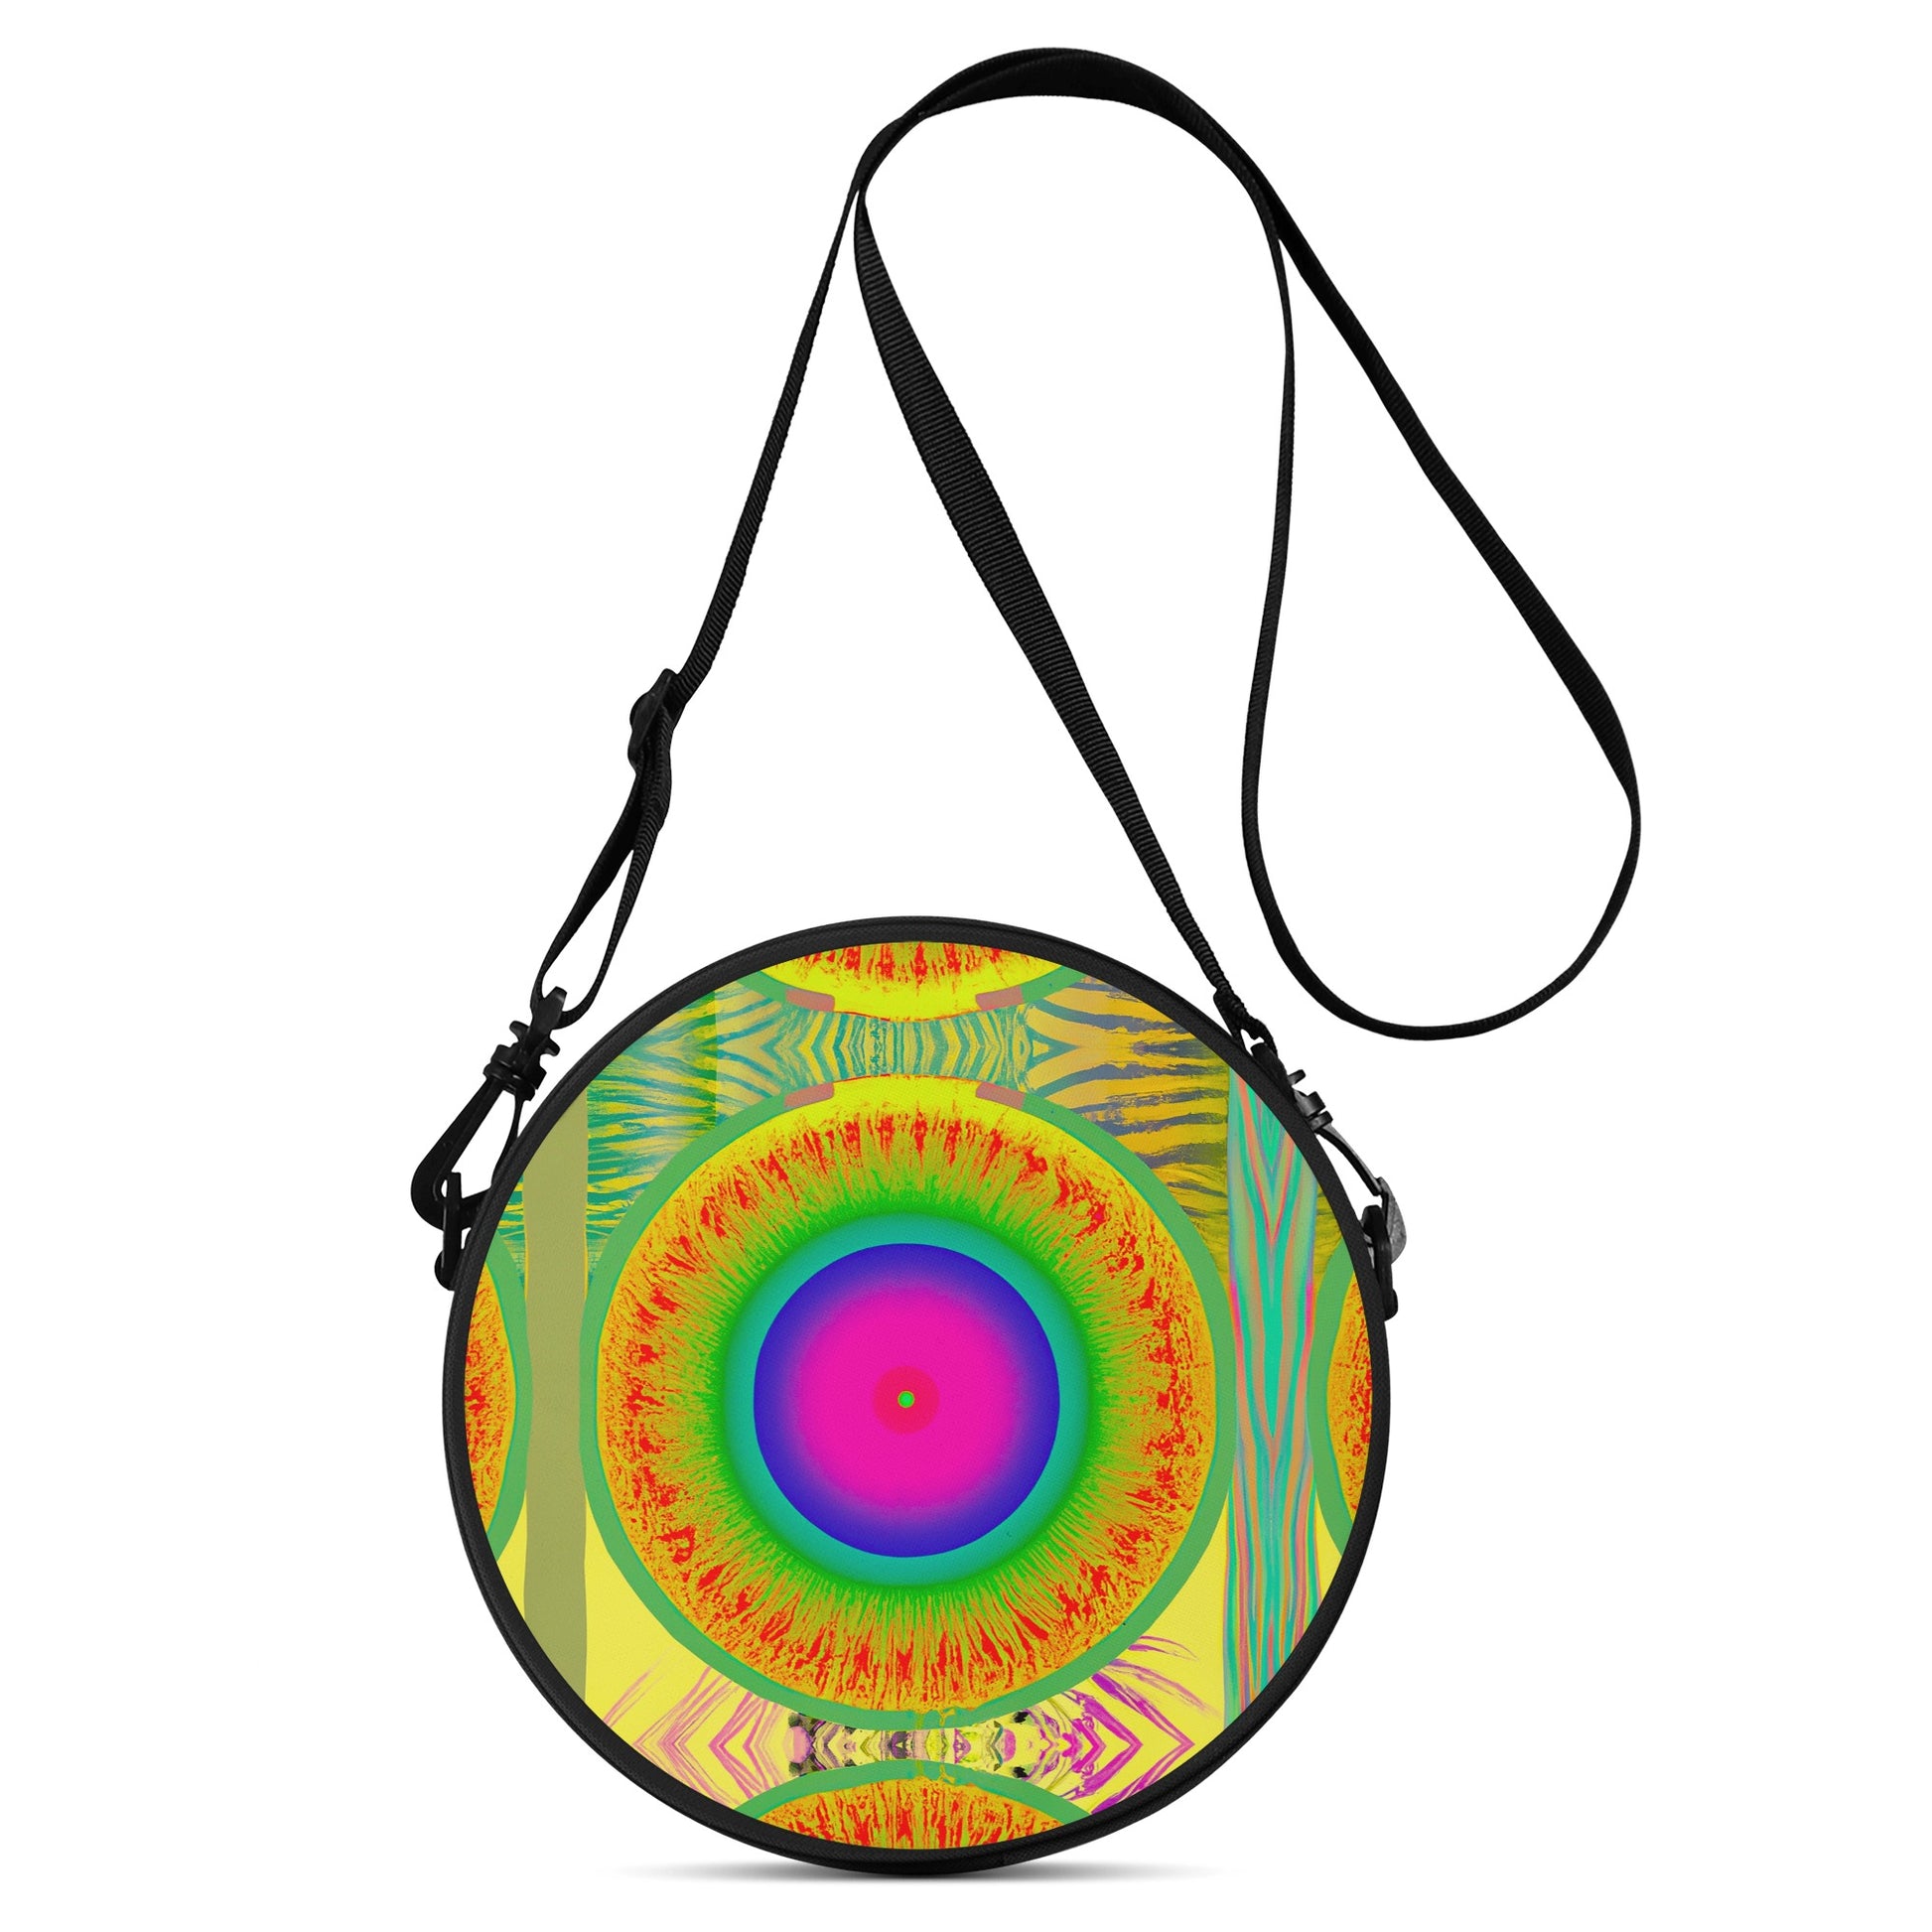 This Round Satchel Bag is a stylish accessory with a cool design that is digitally printed on the front.  Featuring a unique and multi coloured vibrant design of a psychedelic styled dimension neon burn pattern.  Perfect for any look, its eye-catching design will ensure you stand out from the crowd!